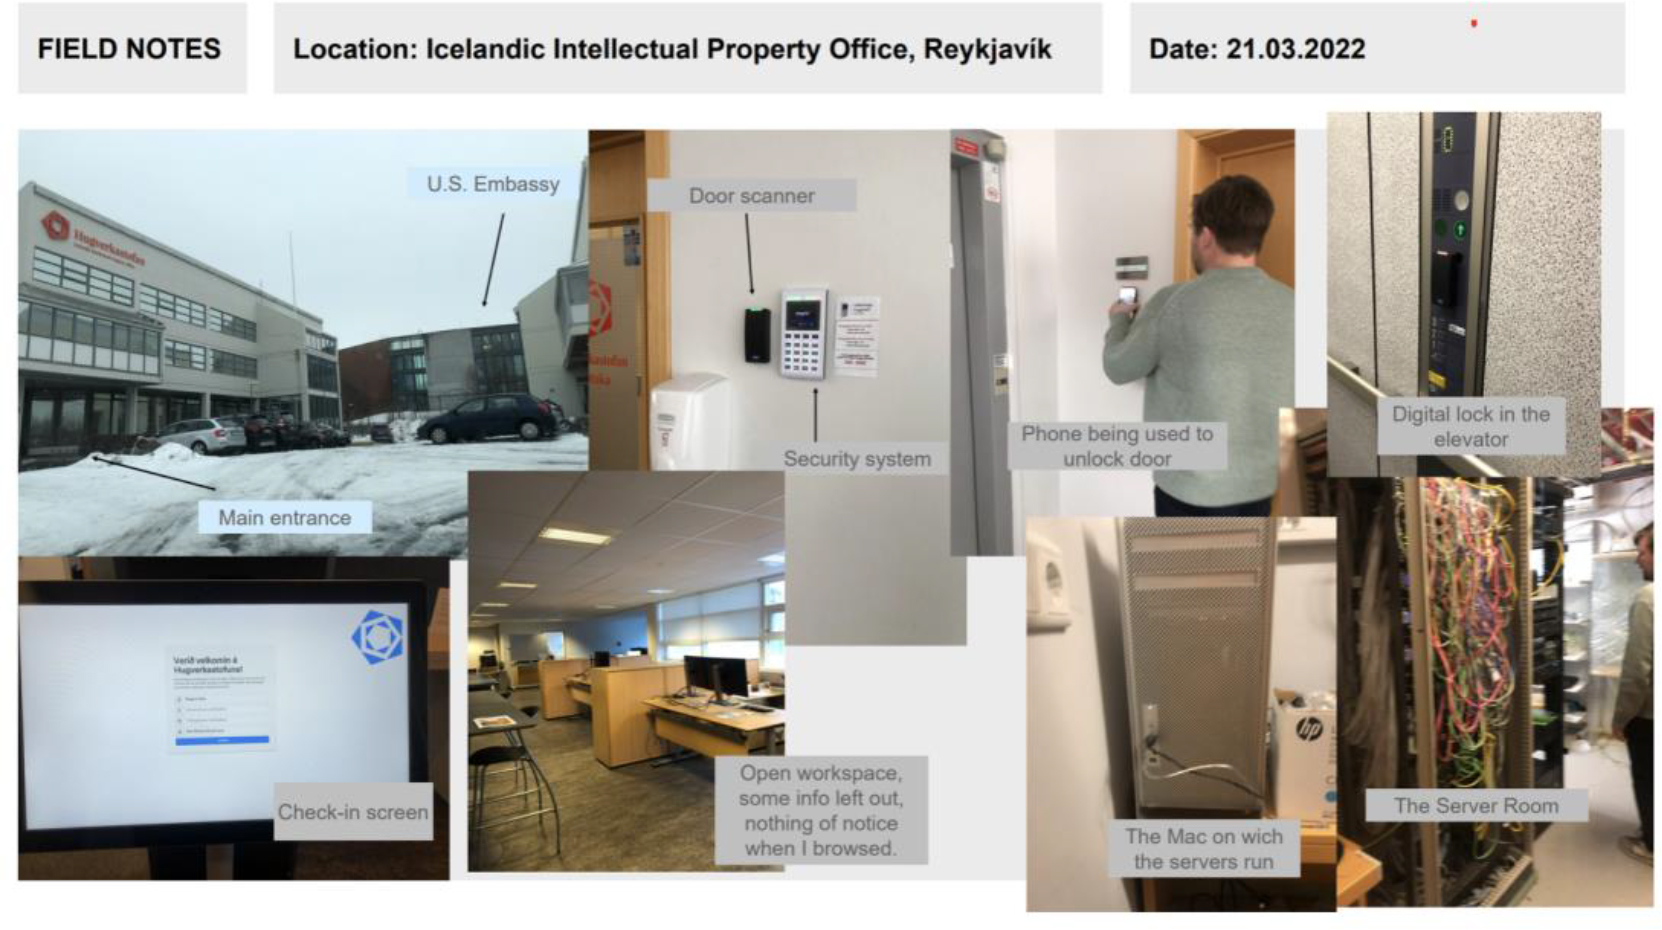 Series of photos taken by student during a field visit to the Icelandic Patent Office, which capture: 1) a check-in screen, 2) the main entrance, noting its proximity to the US Embassy, 3) a door scanner and security system, 4) a phone being used to unlock a door, 5) a digital lock in an elevator, 6) a server room with the back of a server rack visible, 7) photo of the Mac on which the servers are run, and 8) a photo of an open workplace, in which the student noted that no confidential information appeared to have been left out.